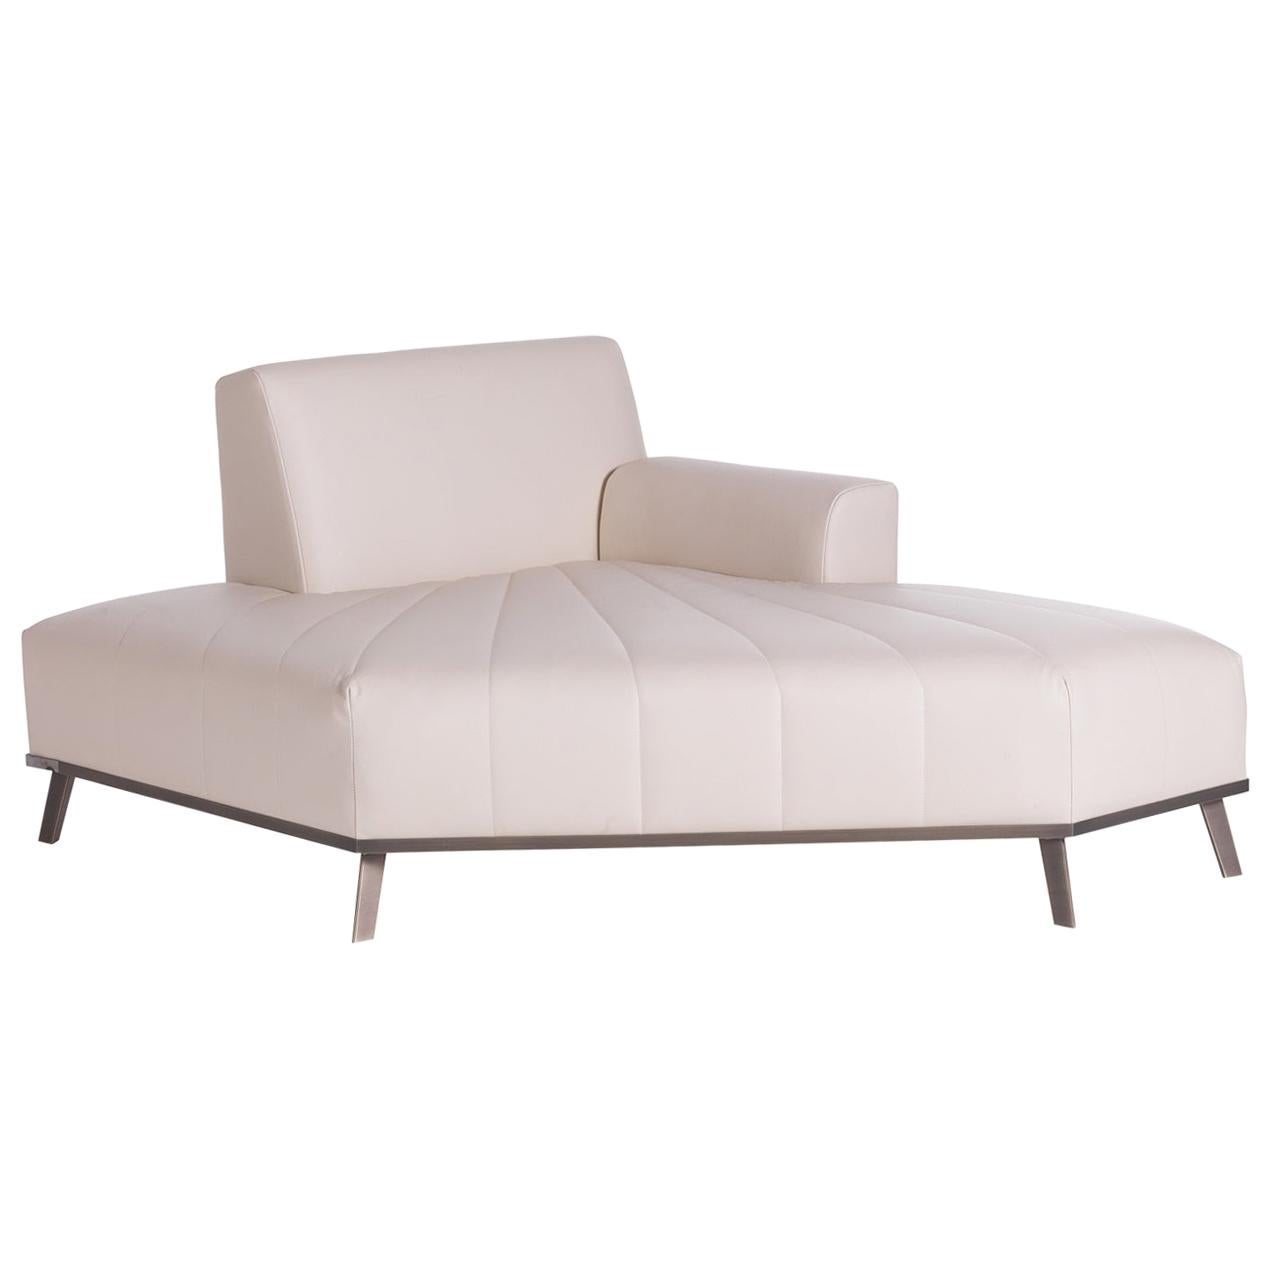 Expanding White Chaise Longue For Sale